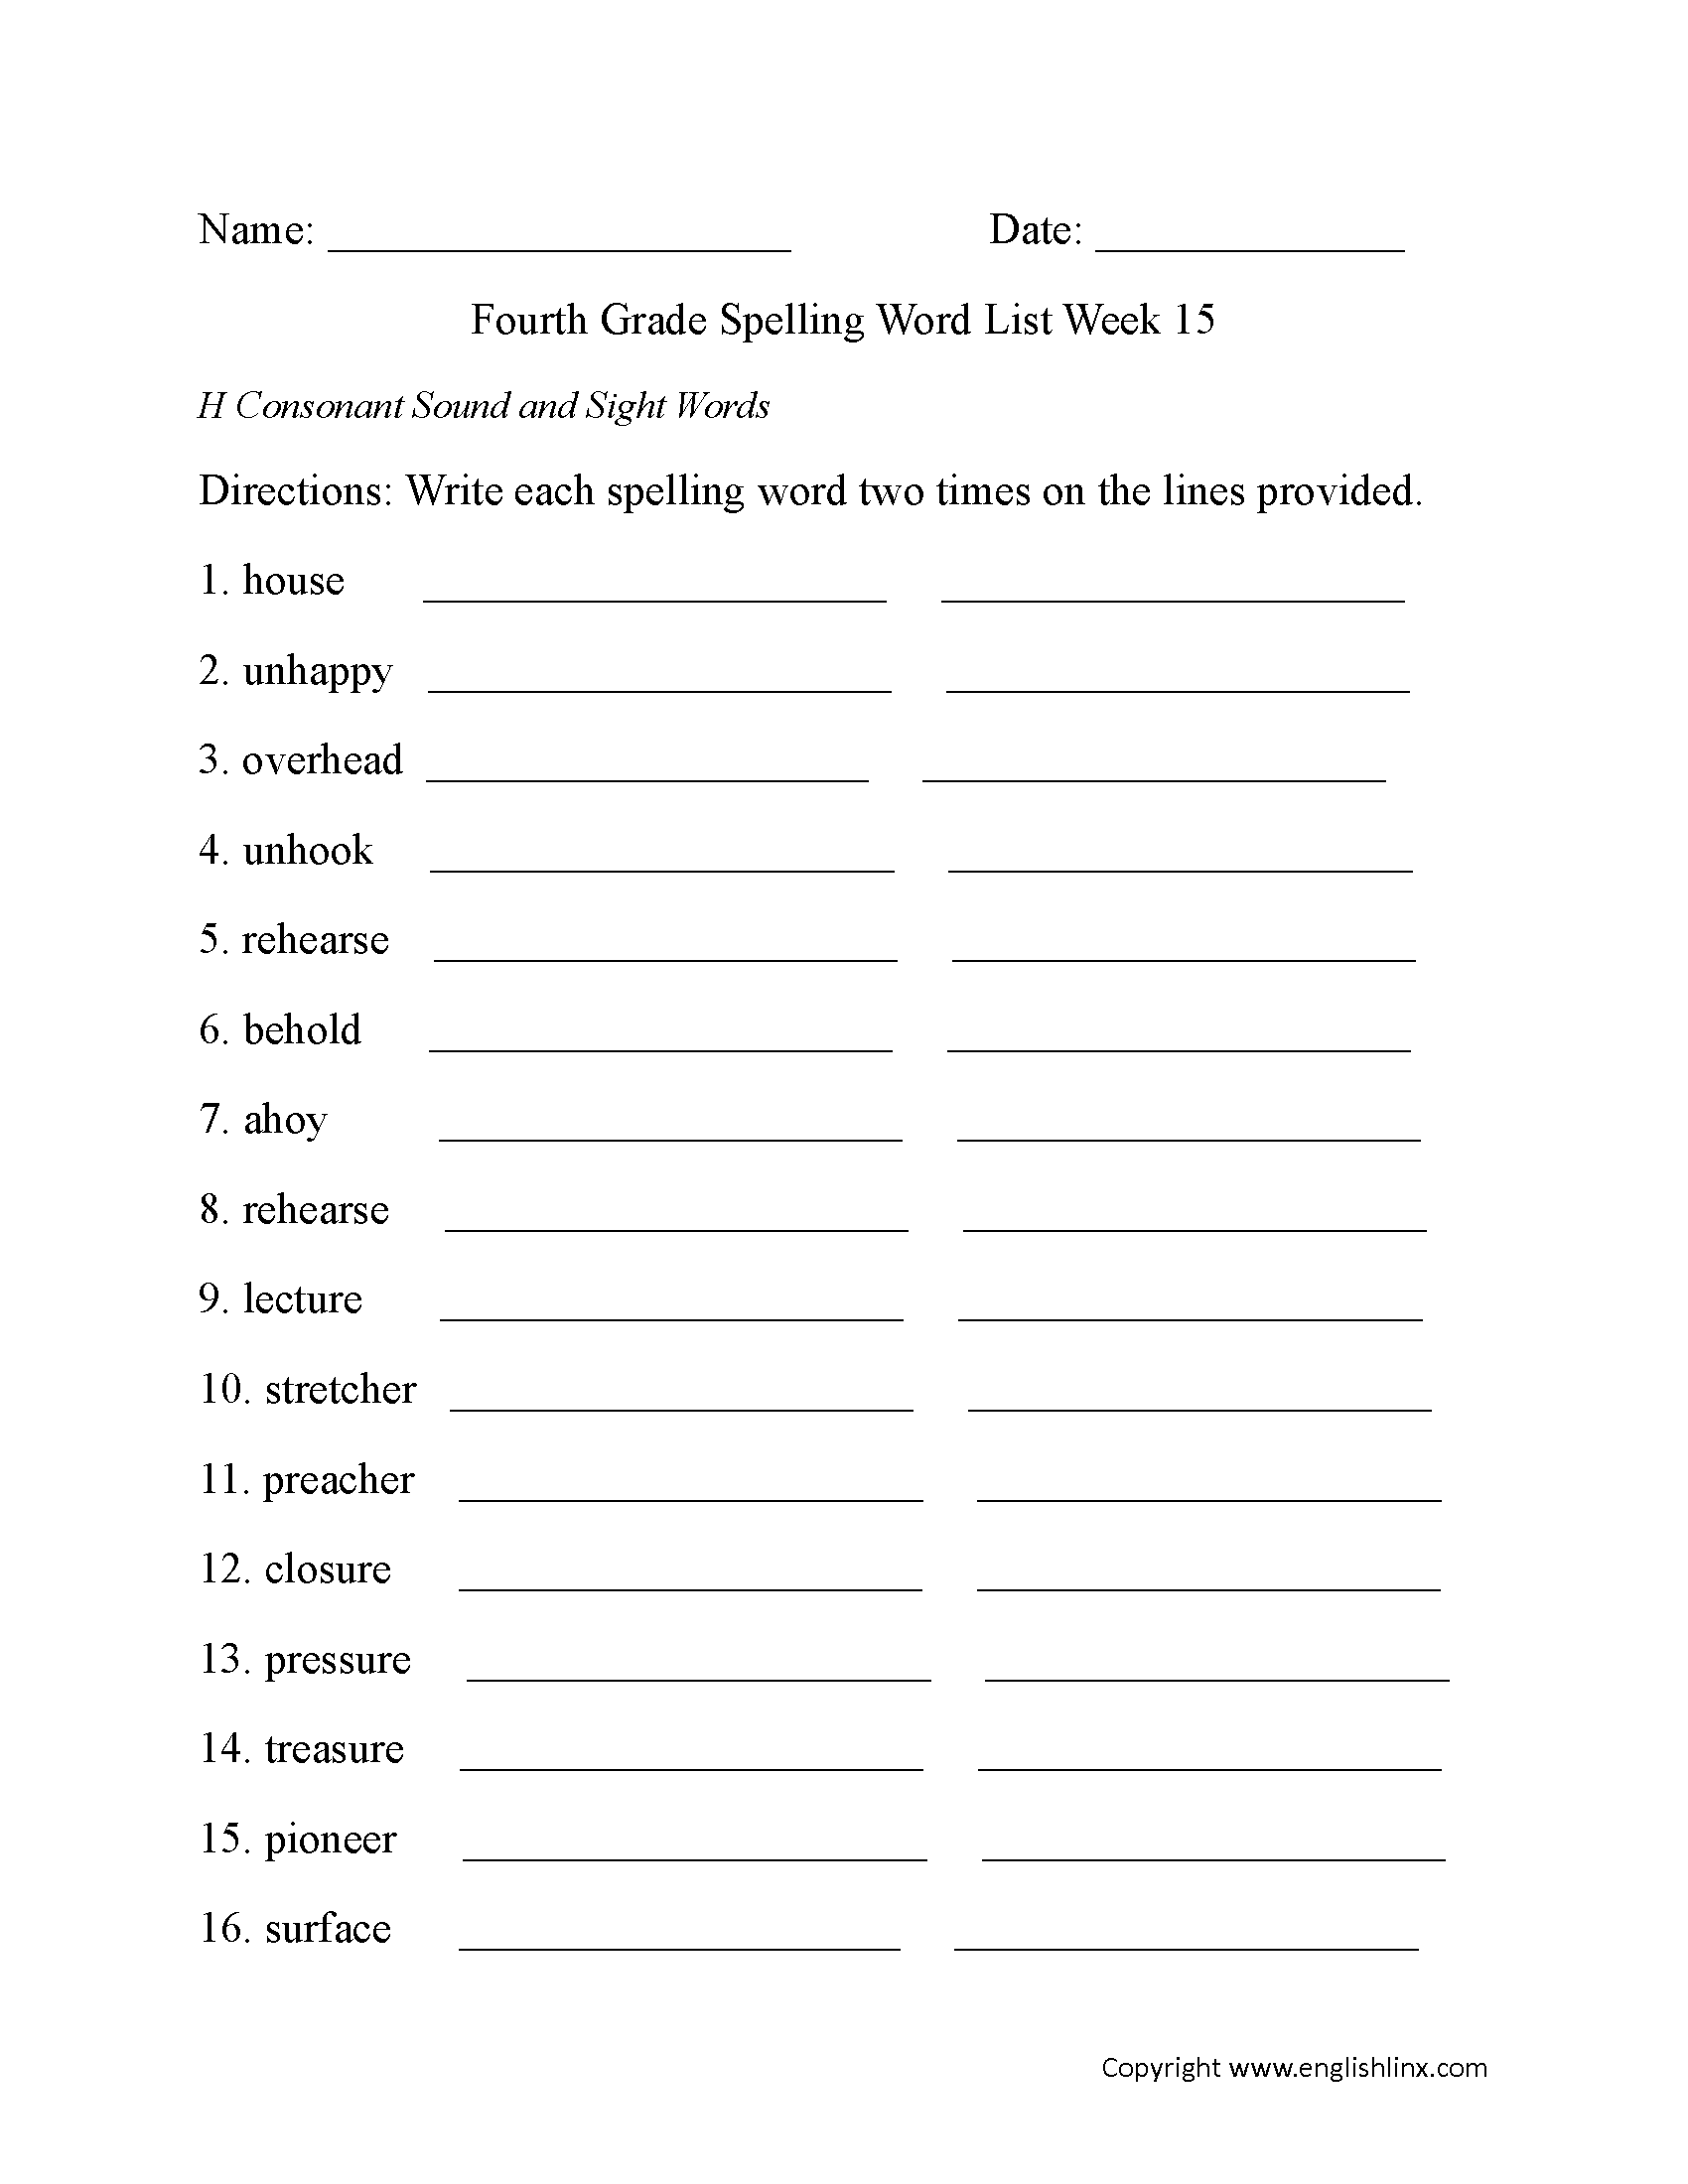 Week 15 H Consonant and Sight Words Fourth Grade Spelling Words Worksheets